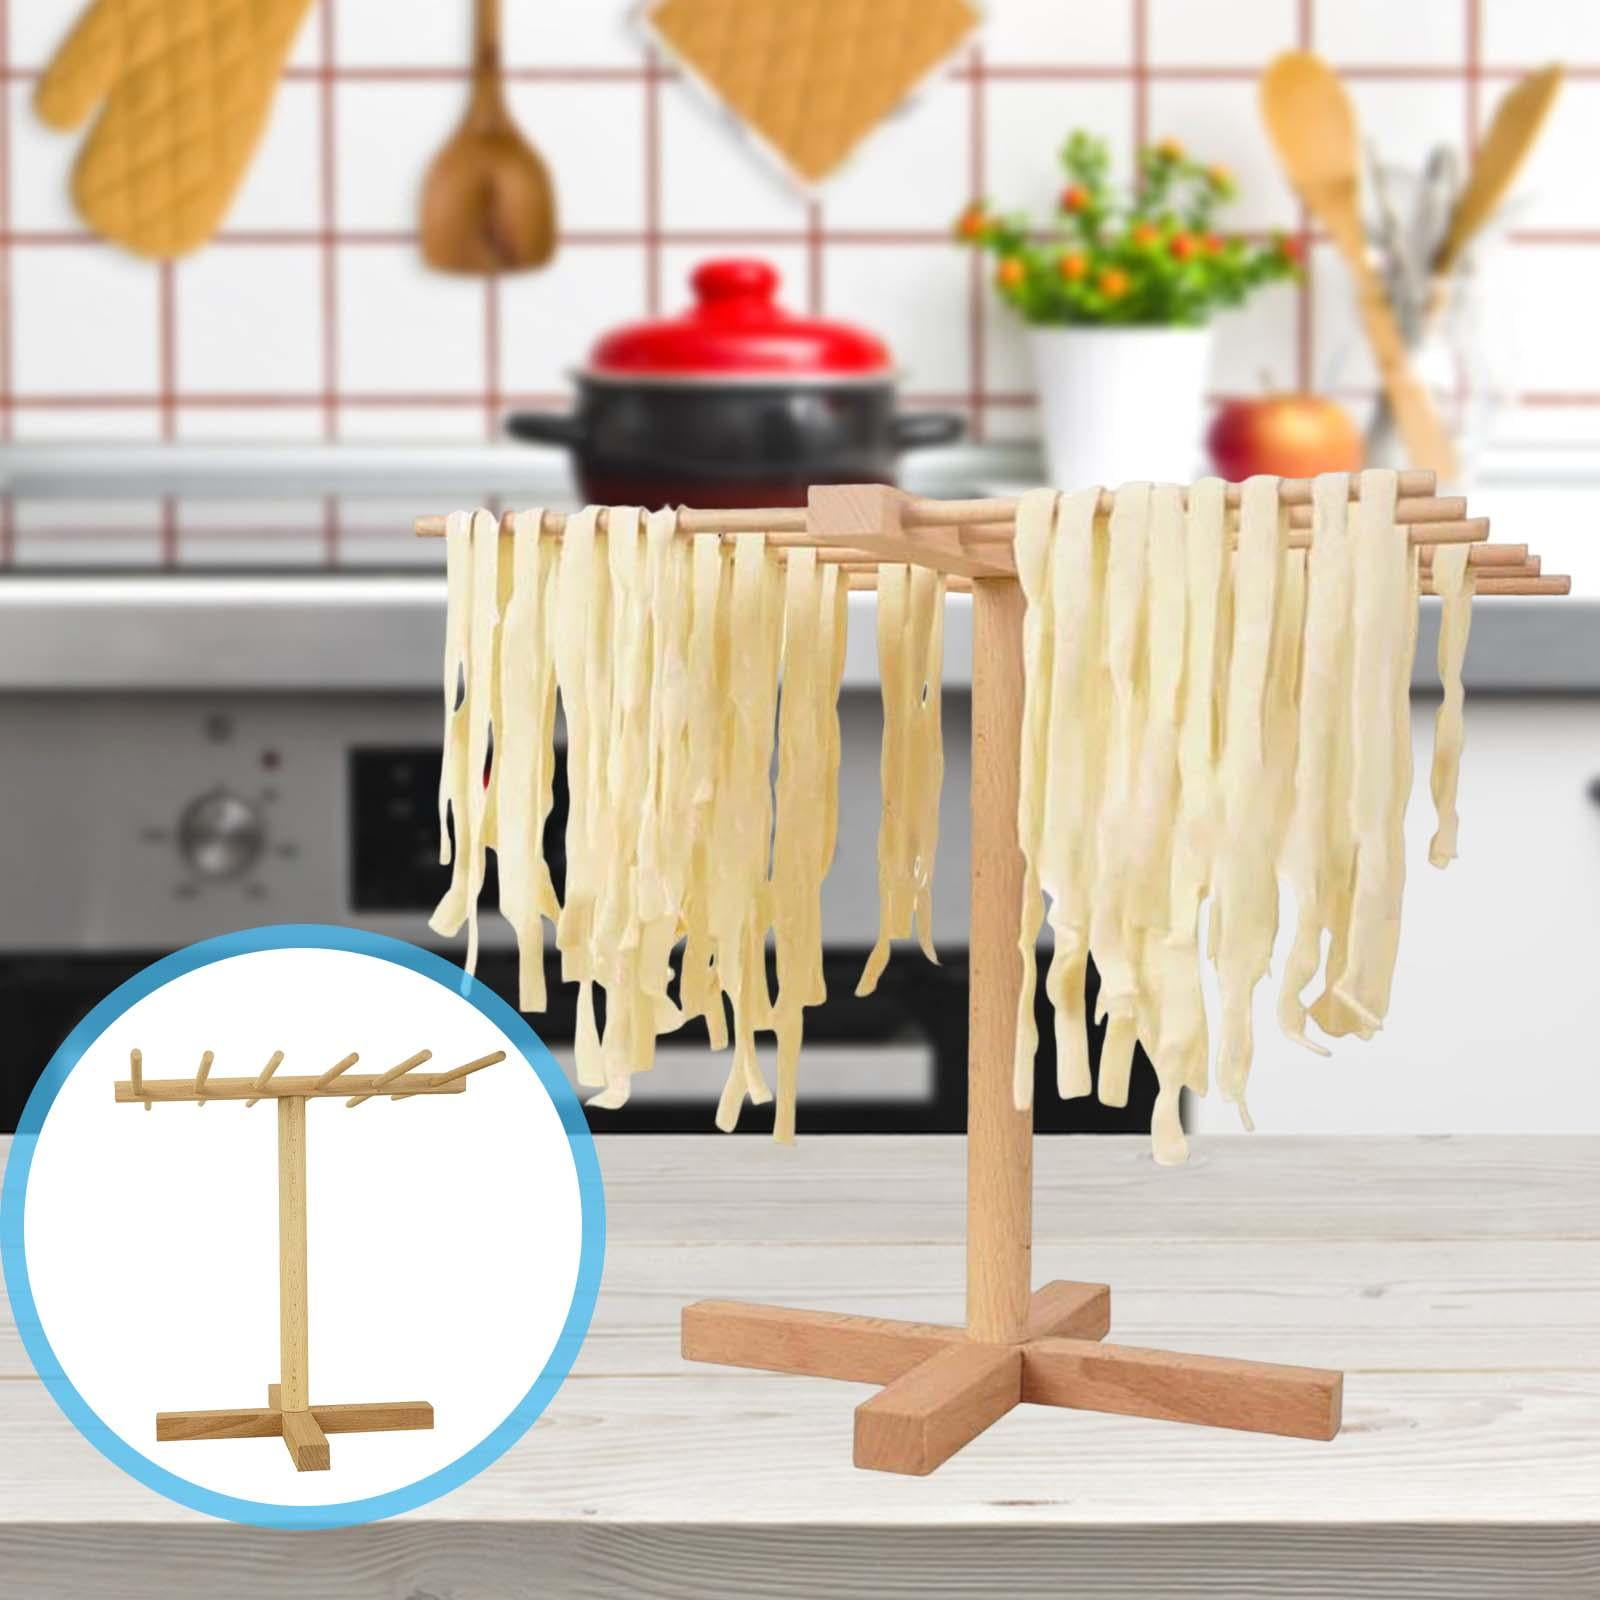 Tohuu Pasta Rack Wooden Noodle Fisherman Pasta Holder with 12 Arms